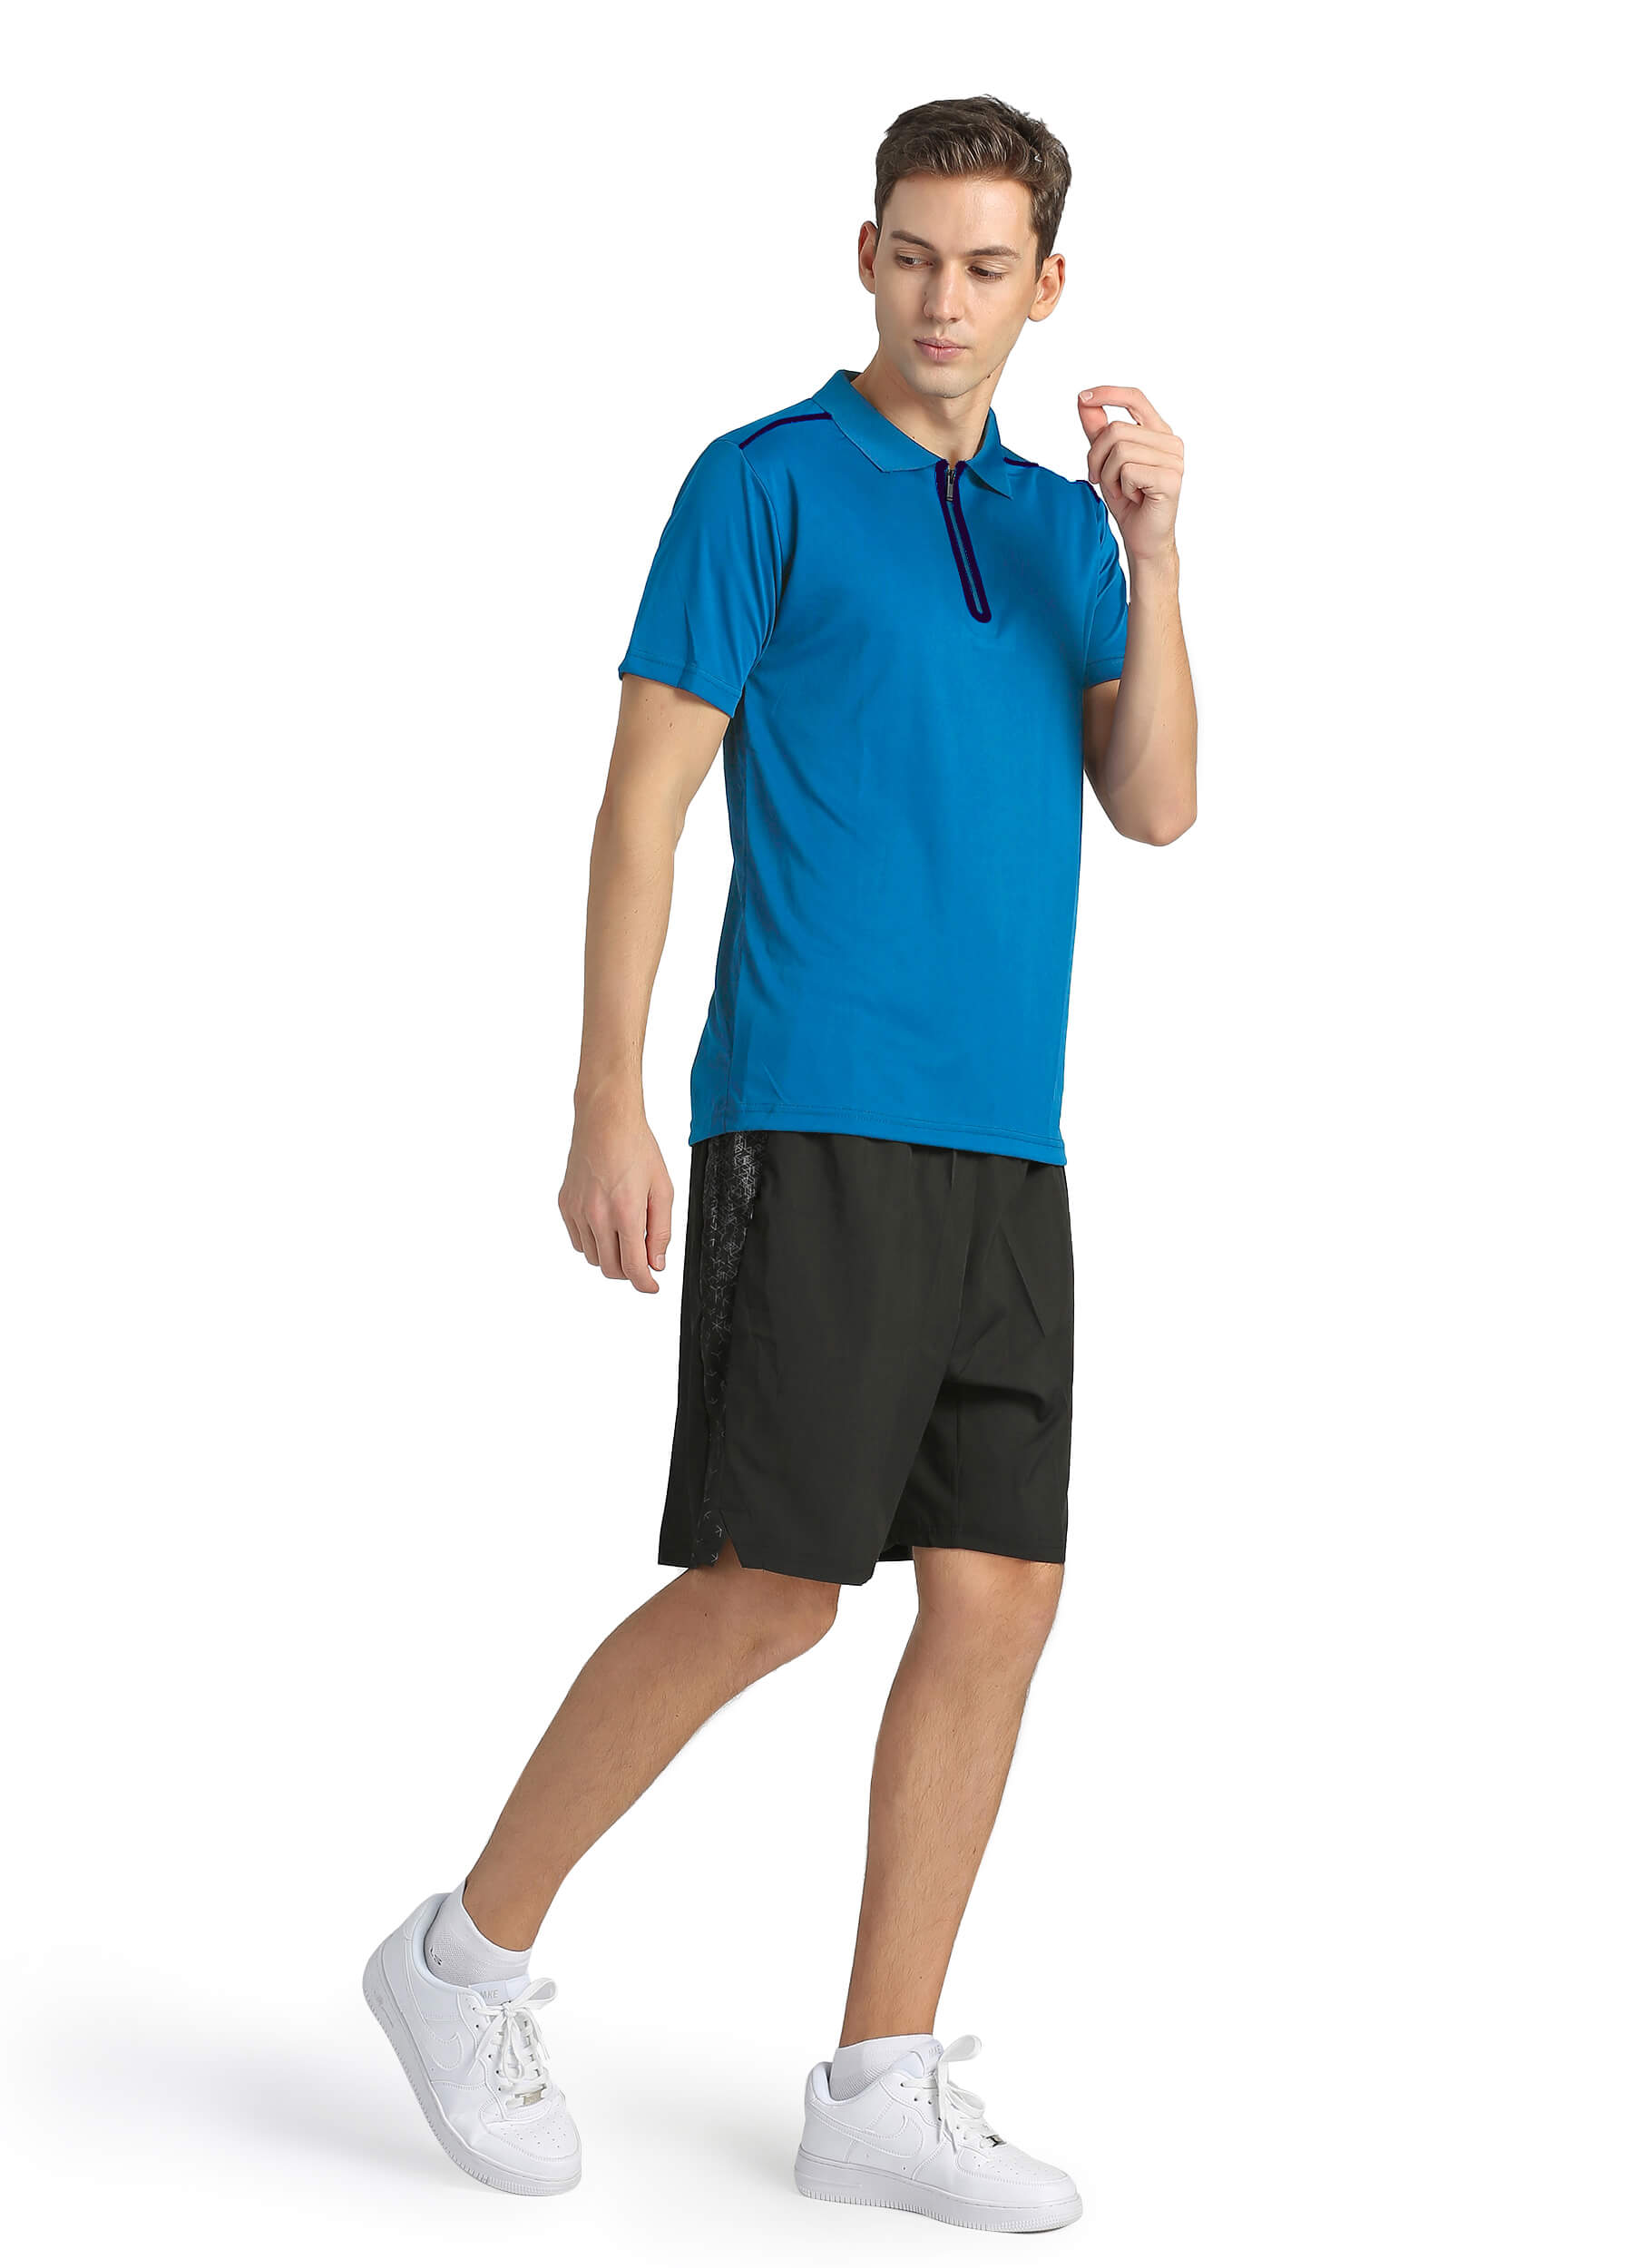 4POSE Men's Drak Blue Moisture Wicking Quick Dry Golf Workout Polo Shirt (Clearance)